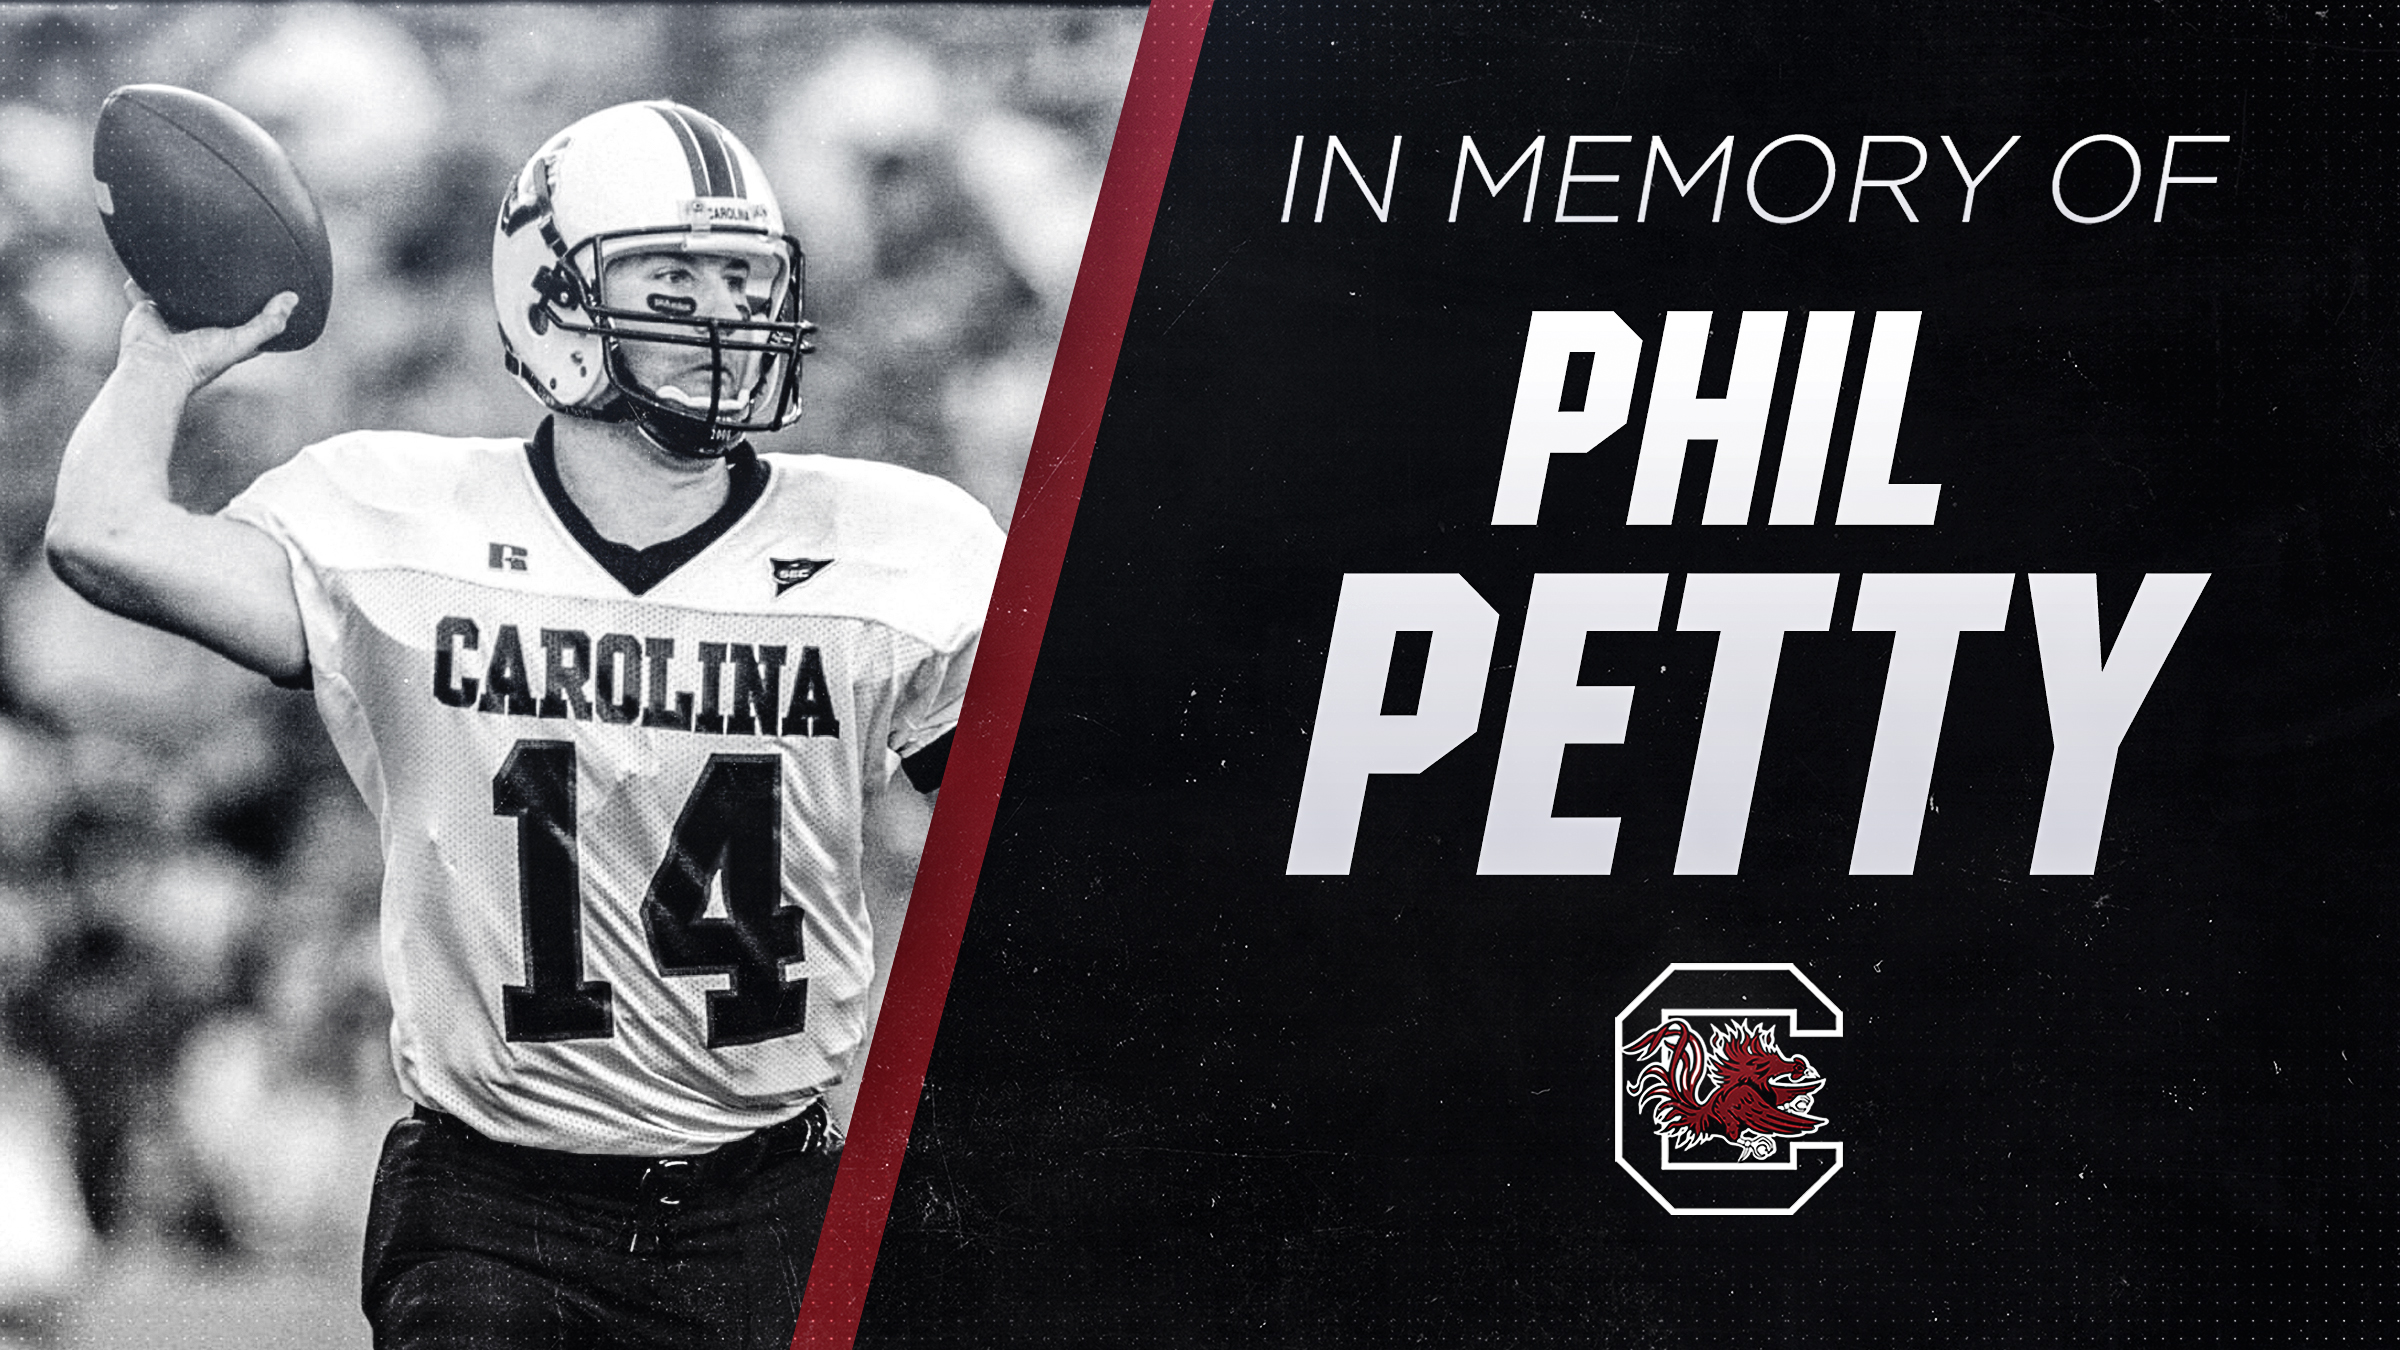 Gamecocks Mourn the Loss of Phil Petty